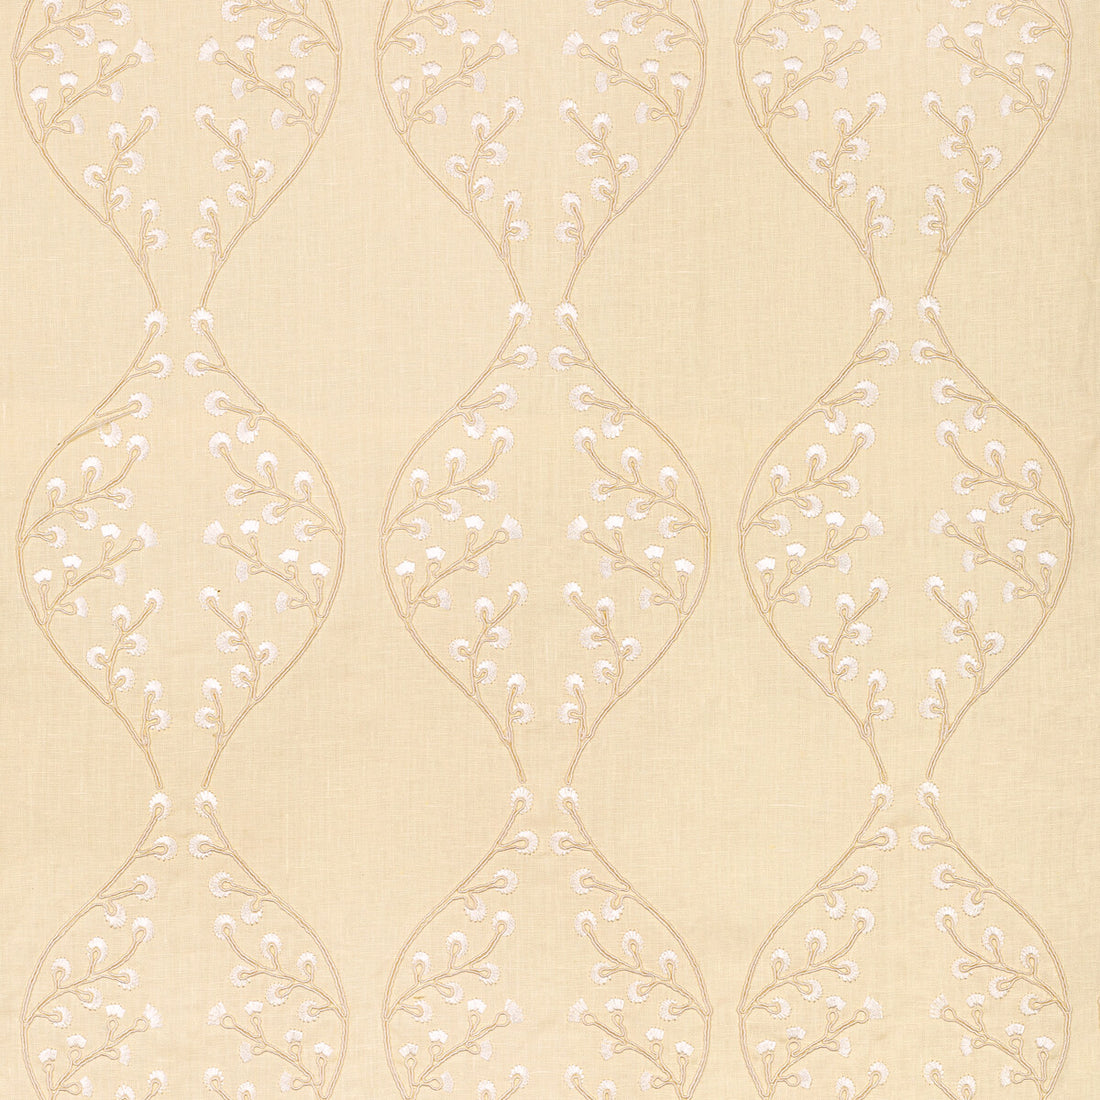 Lillie Embroidery fabric in blonde color - pattern 2021129.1416.0 - by Lee Jofa in the Summerland collection